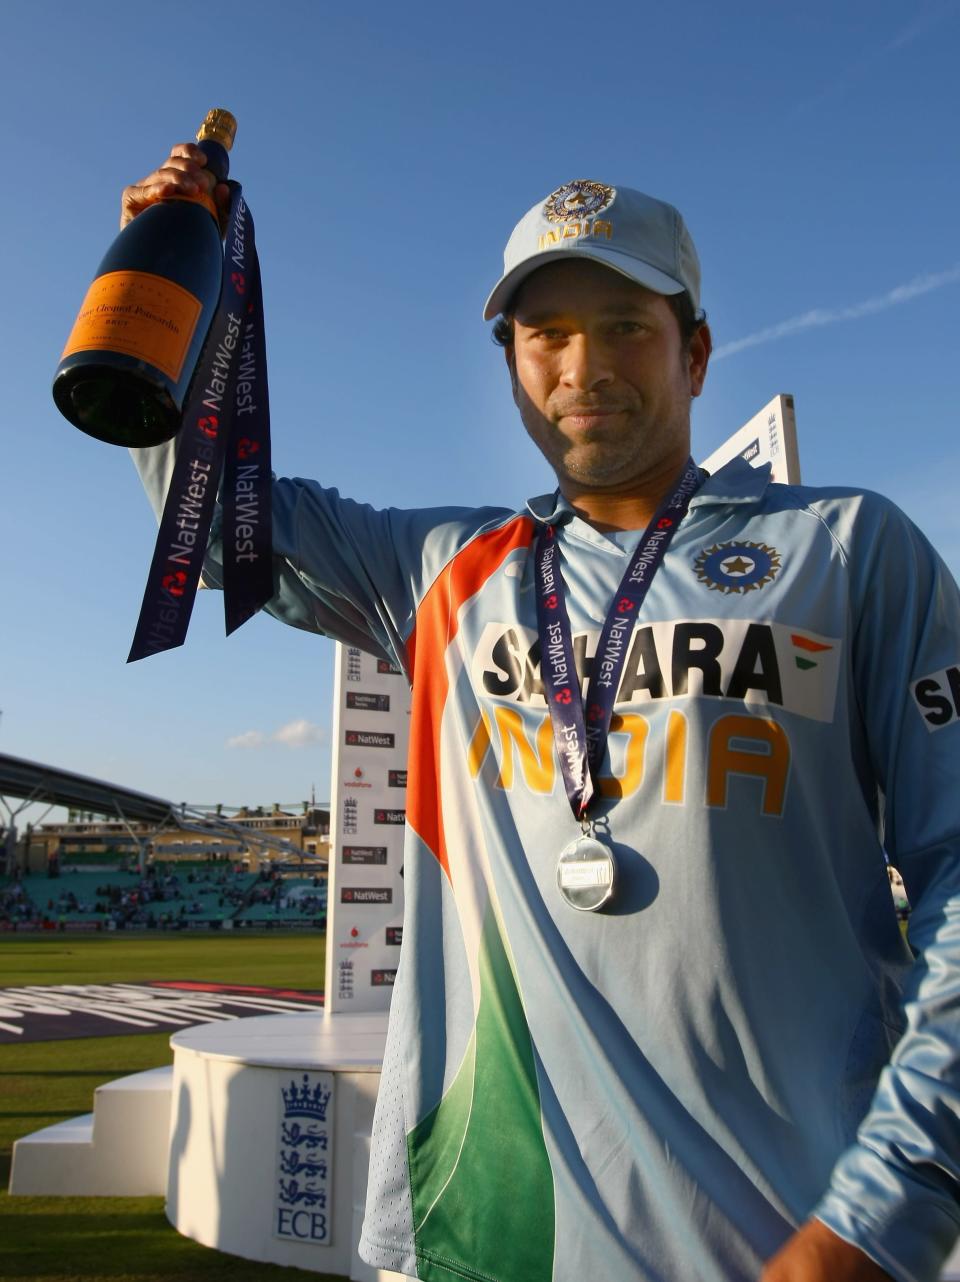 LONDON - SEPTEMBER 05: Sachin Tendulkar of India with his man of the match award after the 6th NatWest ODI between England and India at the Oval on September 5, 2007 in London, England. (Photo by Clive Rose/Getty Images)